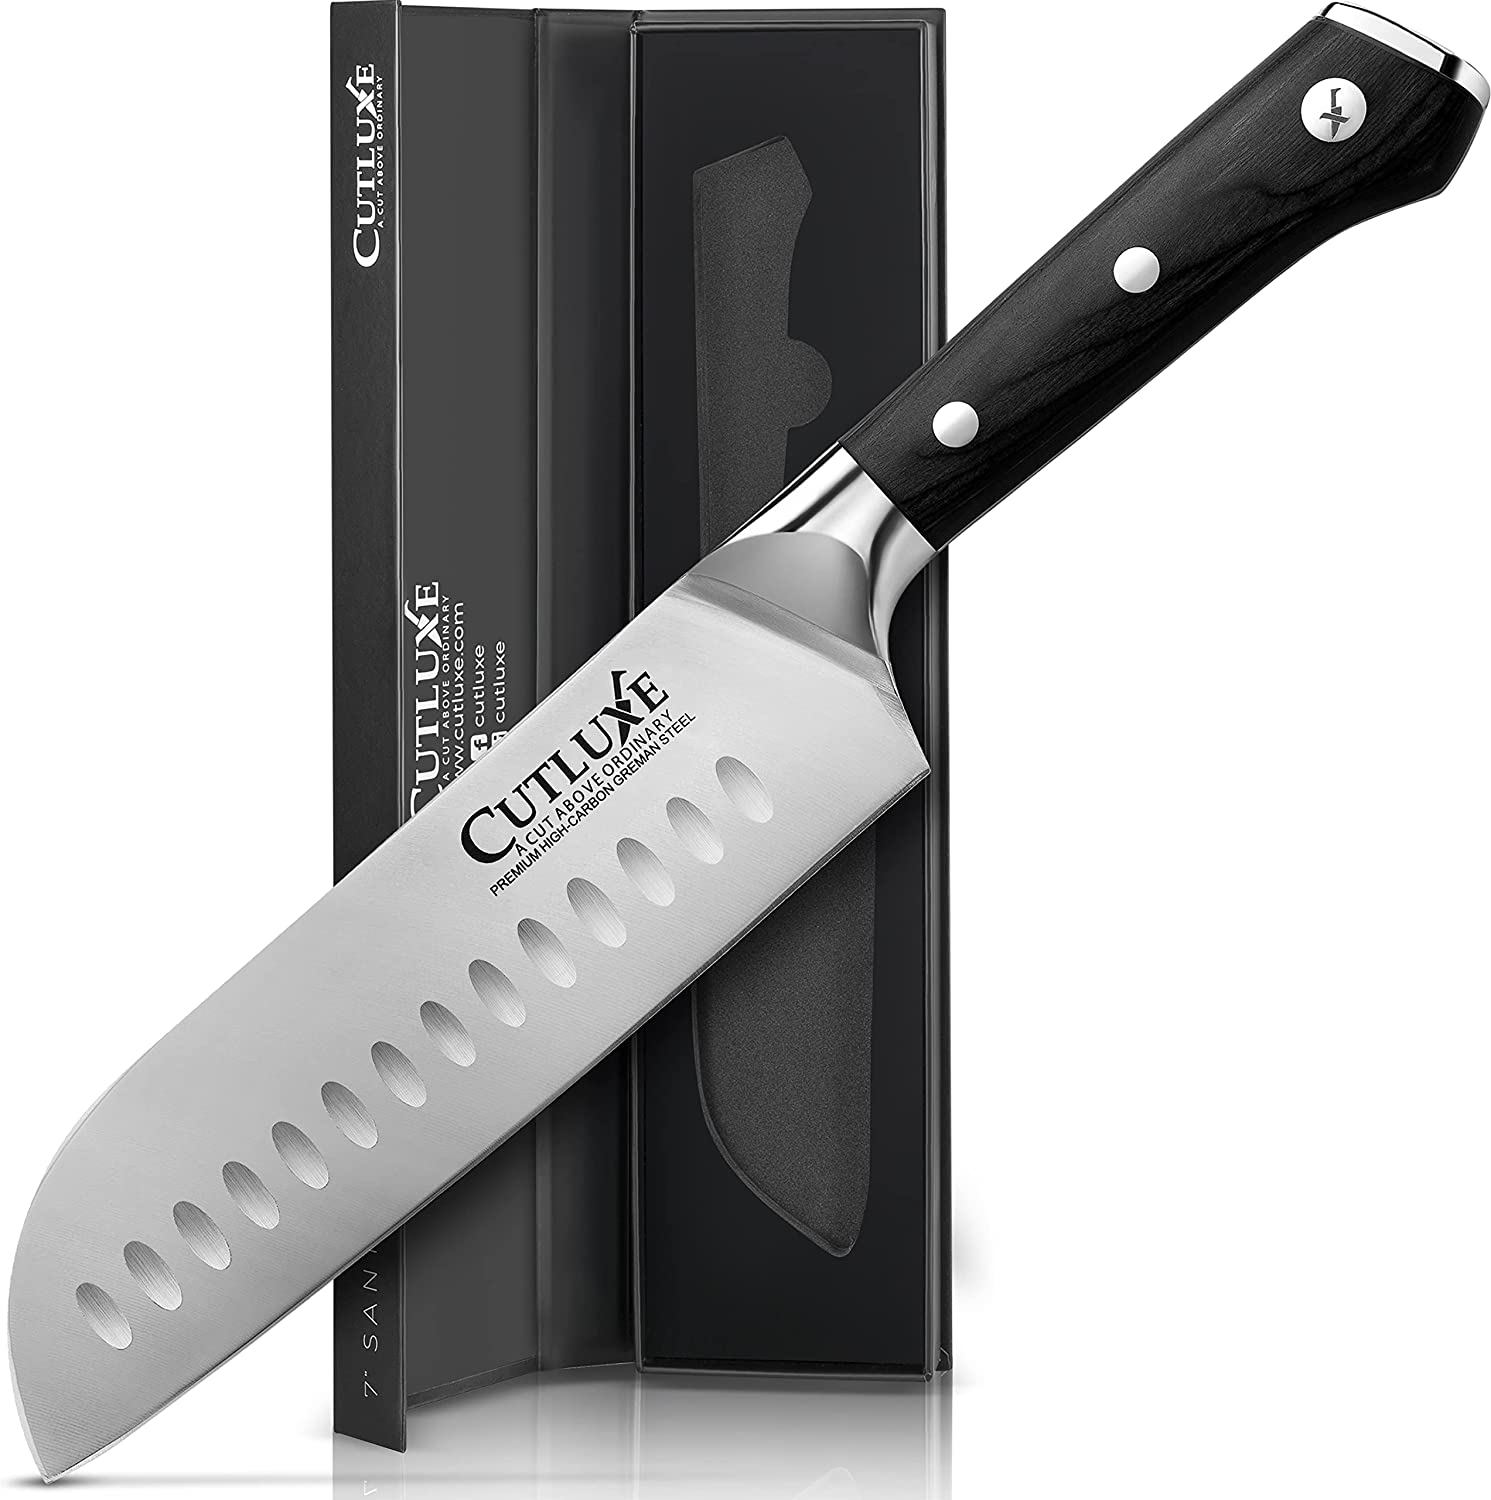 Cuisinart Forged Stainless Steel Premium Steak Knives, 6 -Piece Set